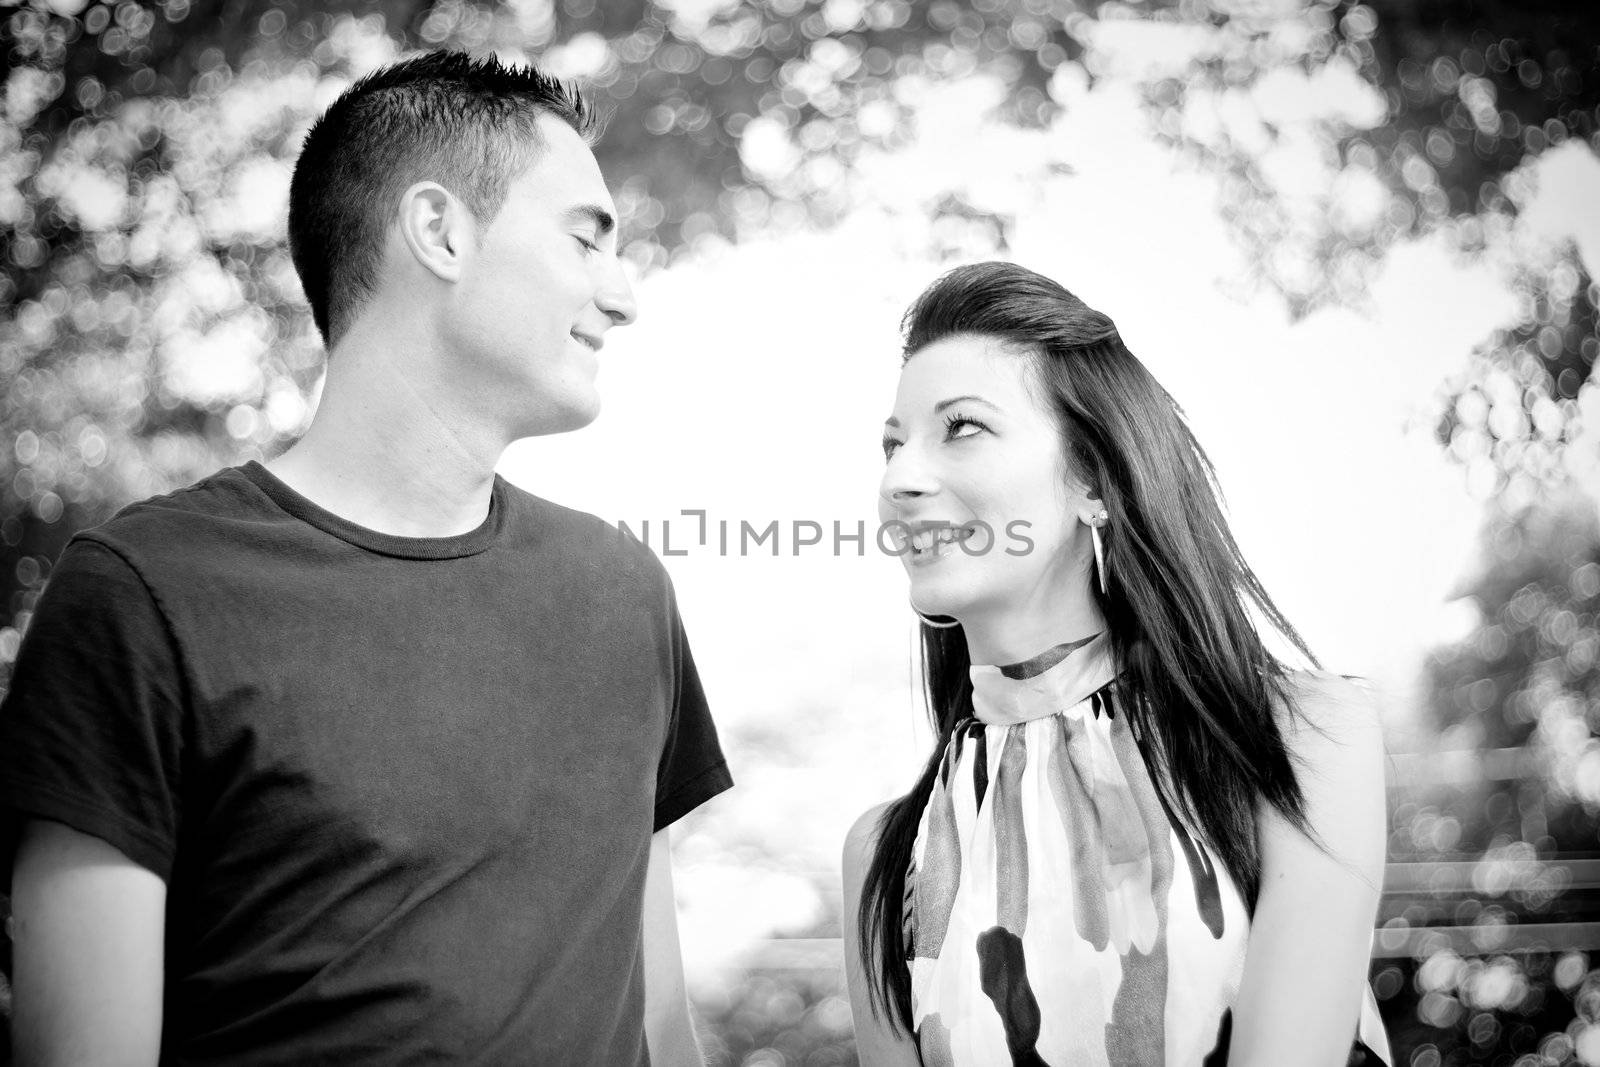 A happy young couple in their mid 20s smiling in black and white.